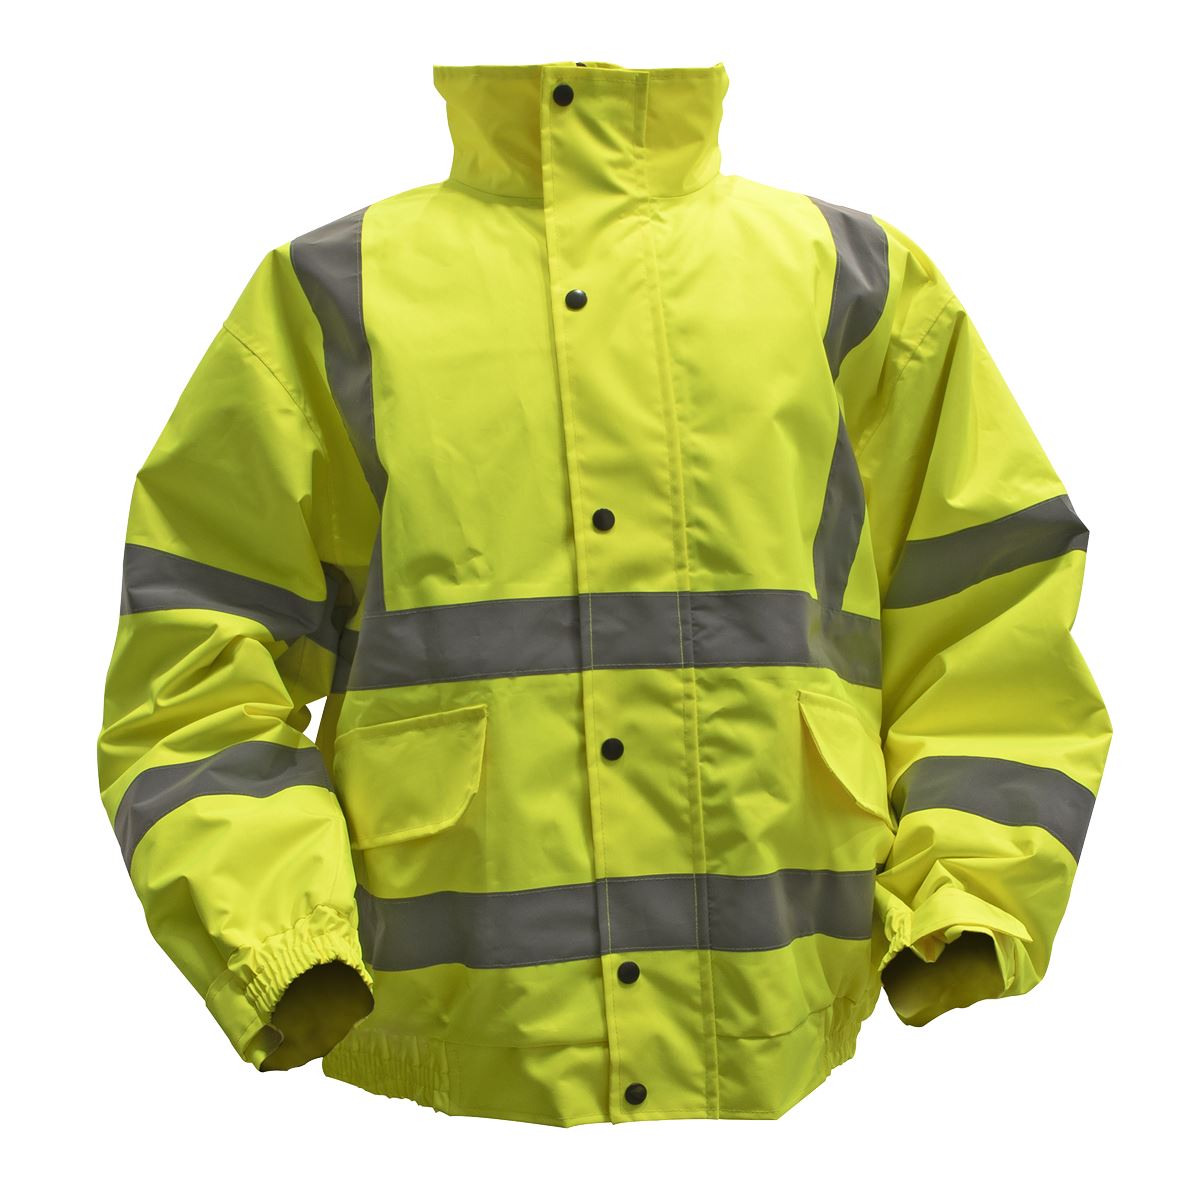 Sealey Hi-Vis Yellow Jacket with Quilted Lining & Elastic Waist - L 802L